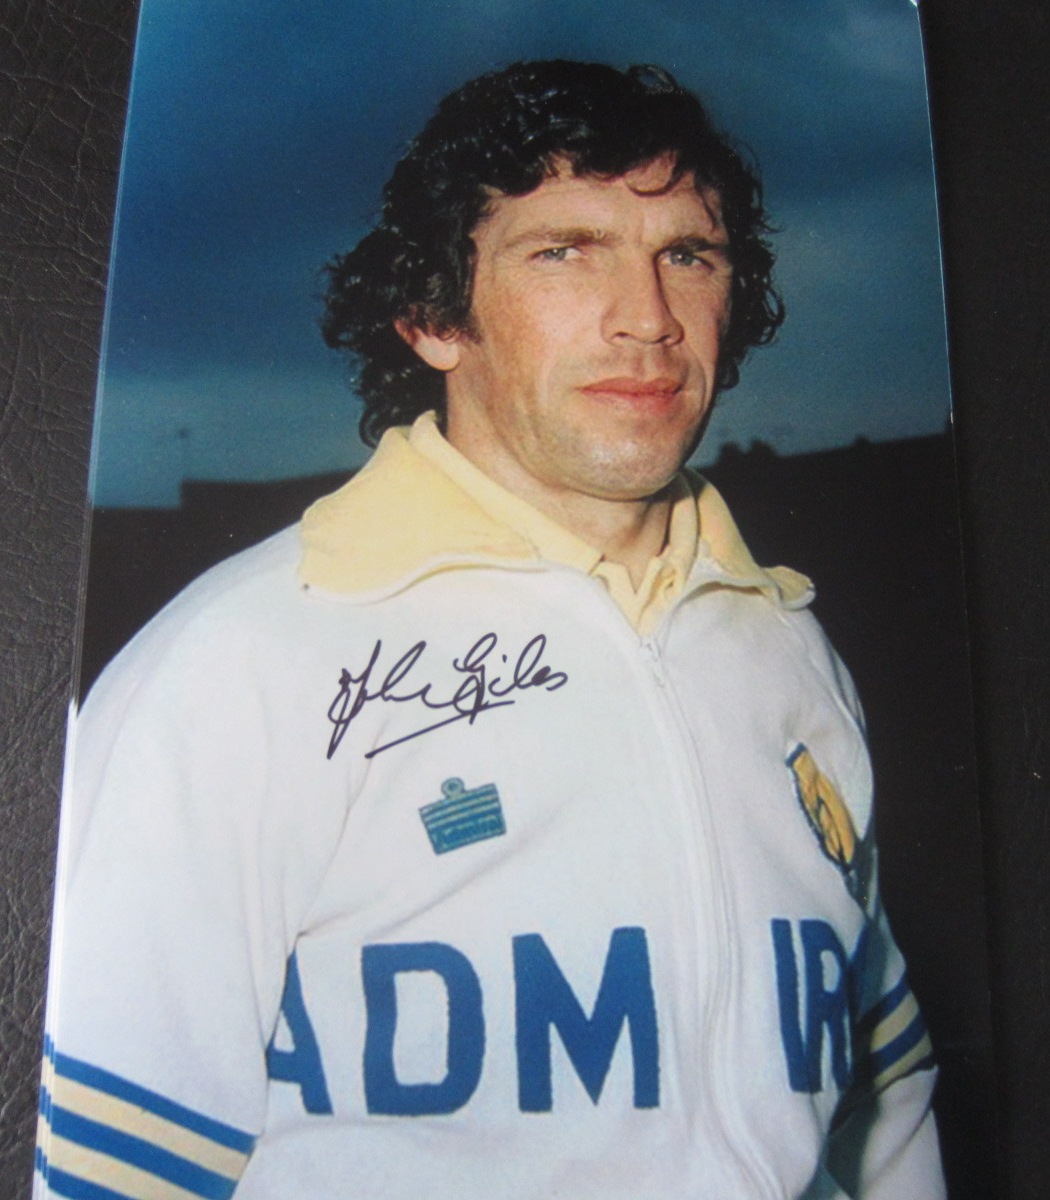 LEEDS UNITED - AUTOGRAPHED PHOTO OF JOHNNY GILES